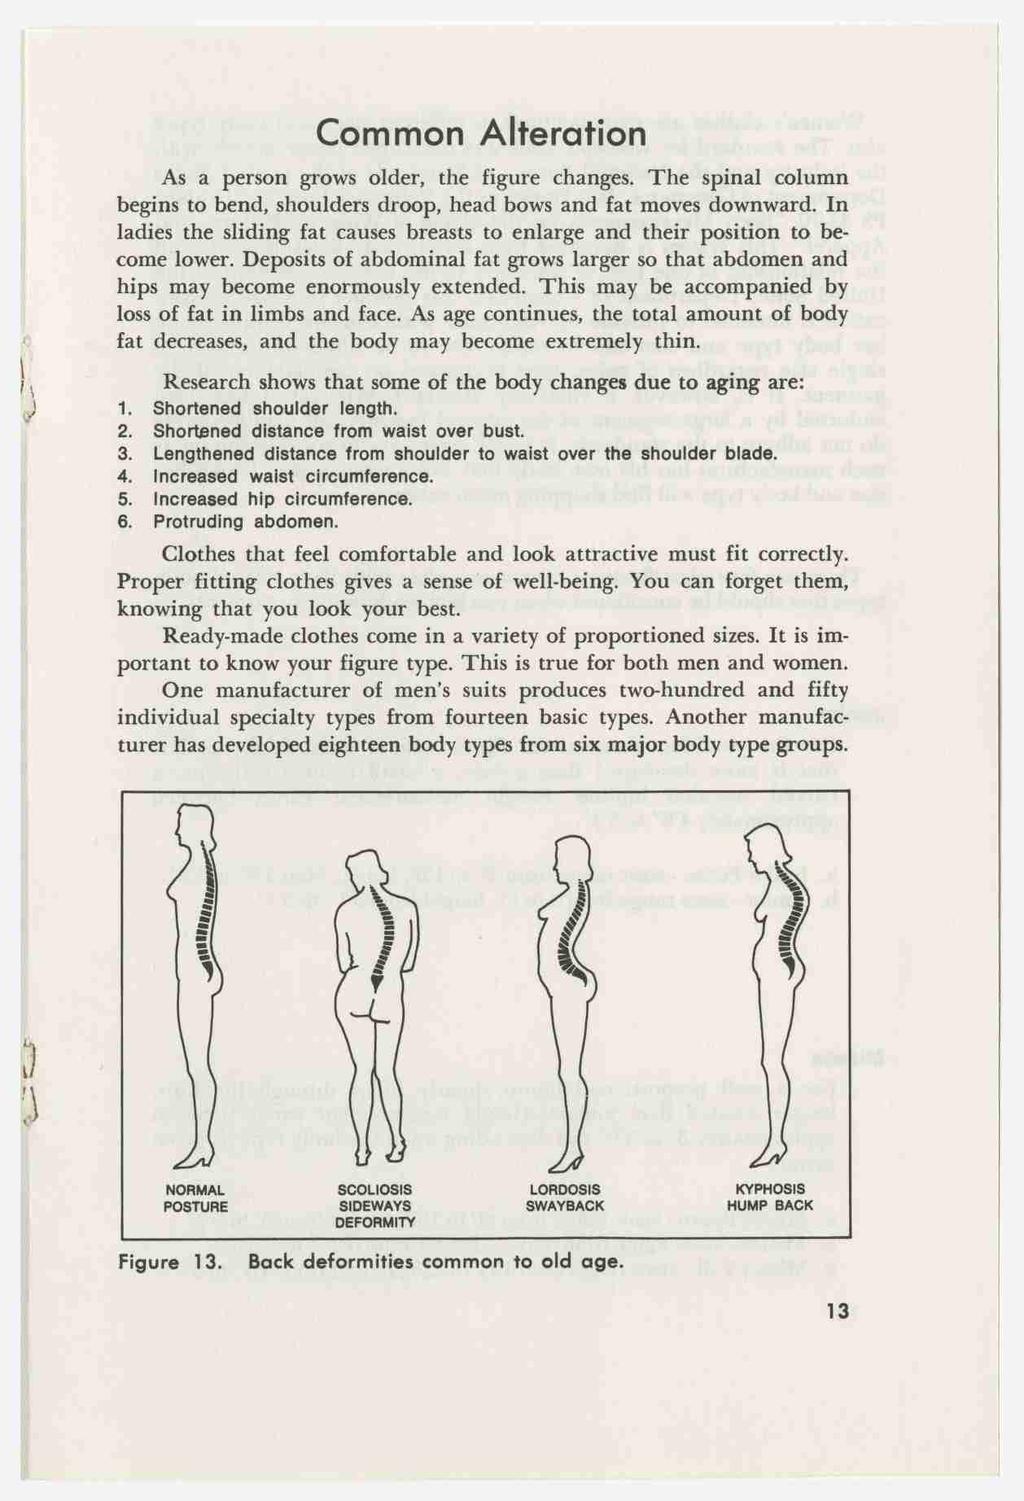 ix. 1' Common Alteration As a person grows older, the figure changes. The spinal column begins to bend, shoulders droop, head bows and fat moves downward.